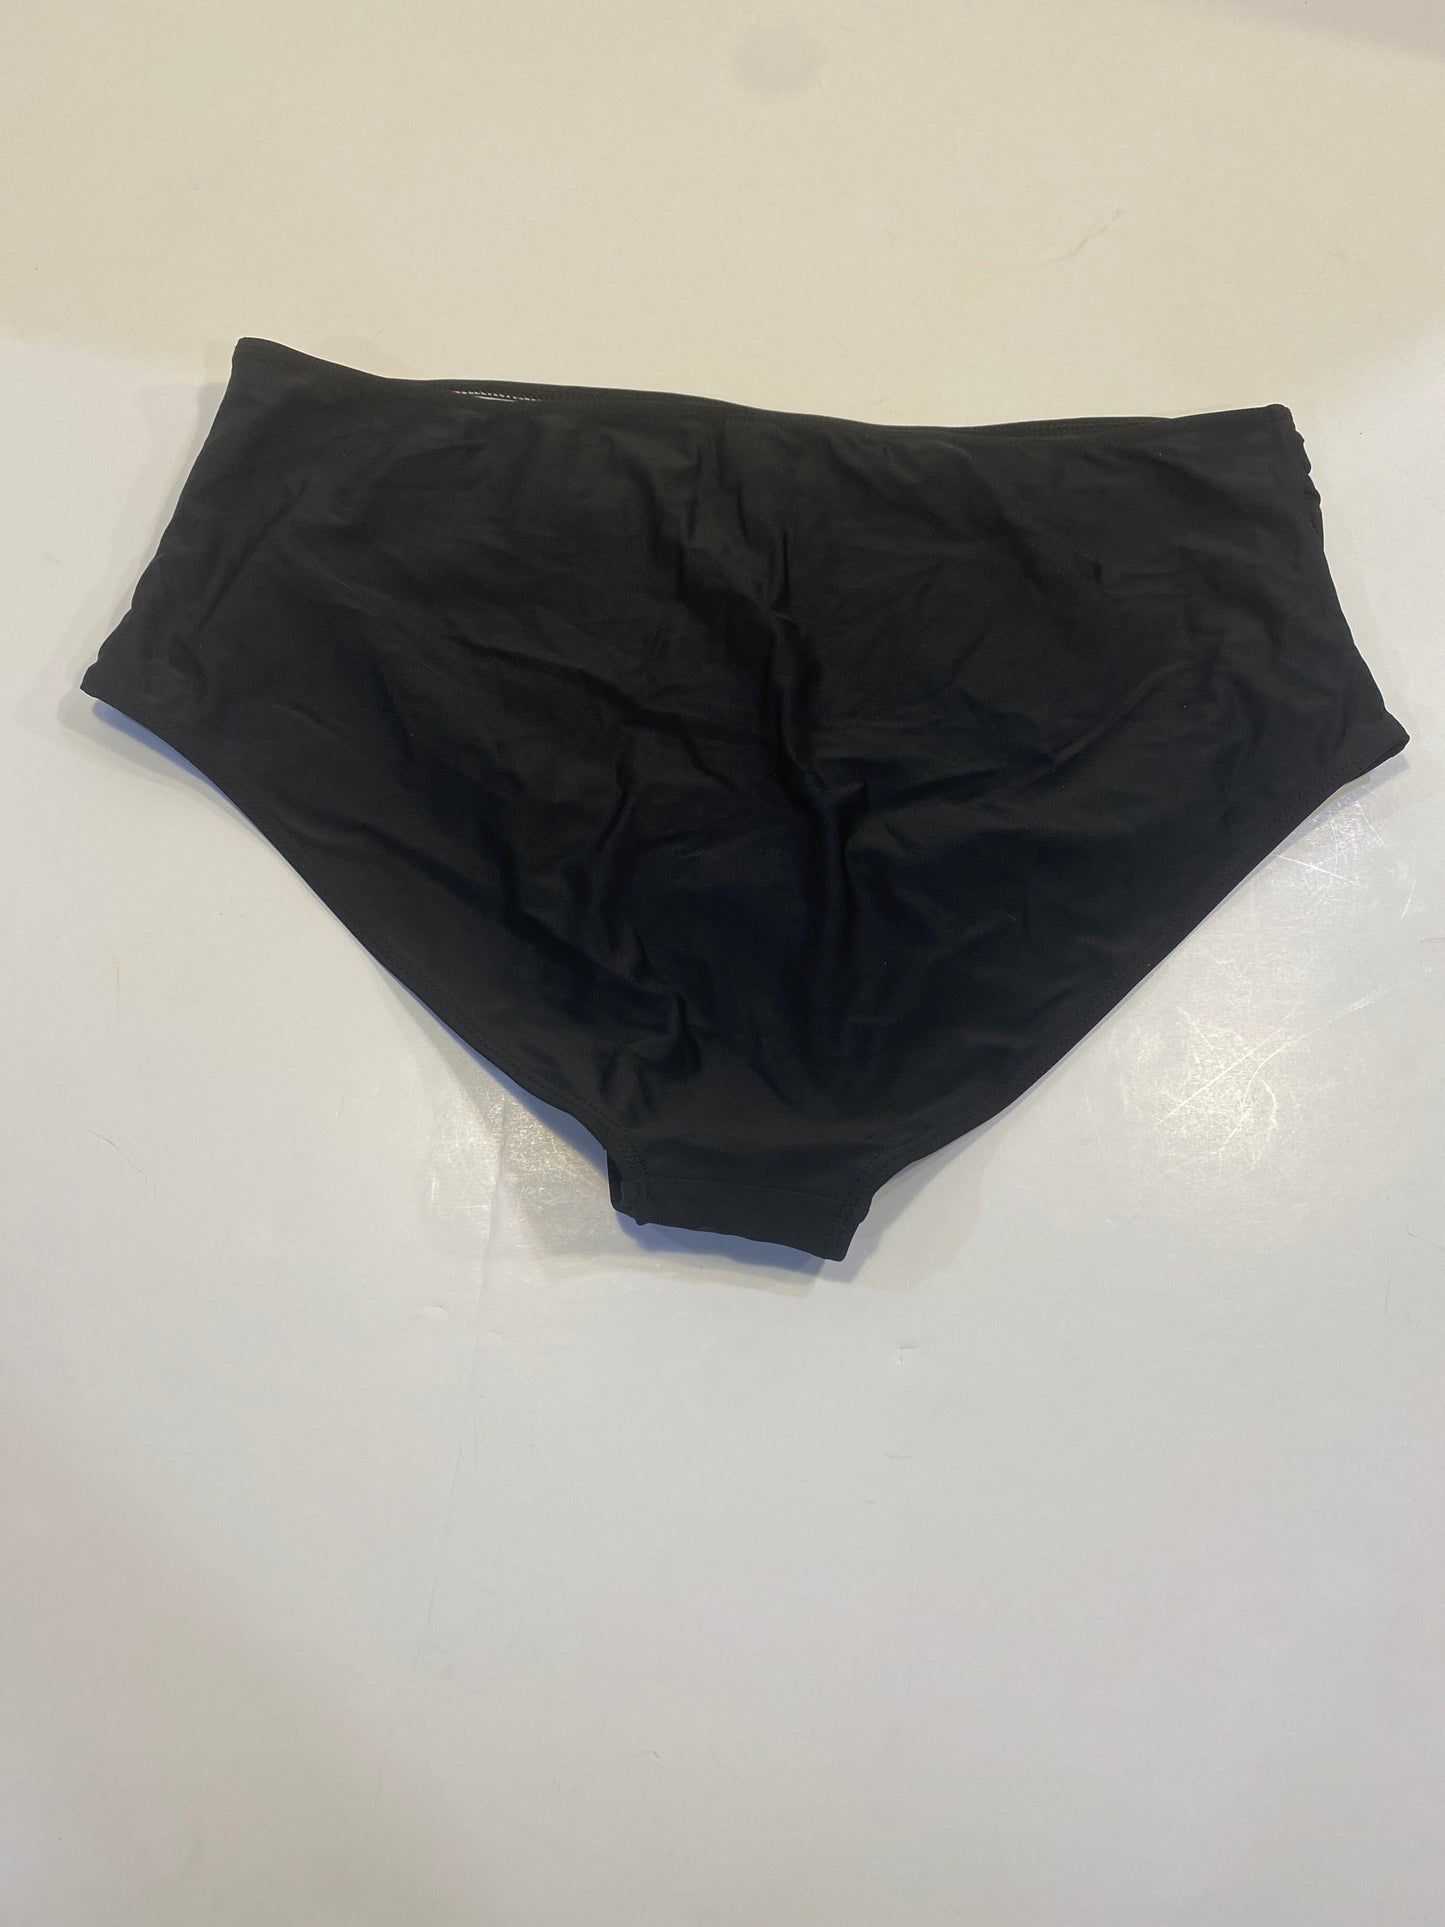 Black Swimsuit Bottom Clothes Mentor, Size 2x